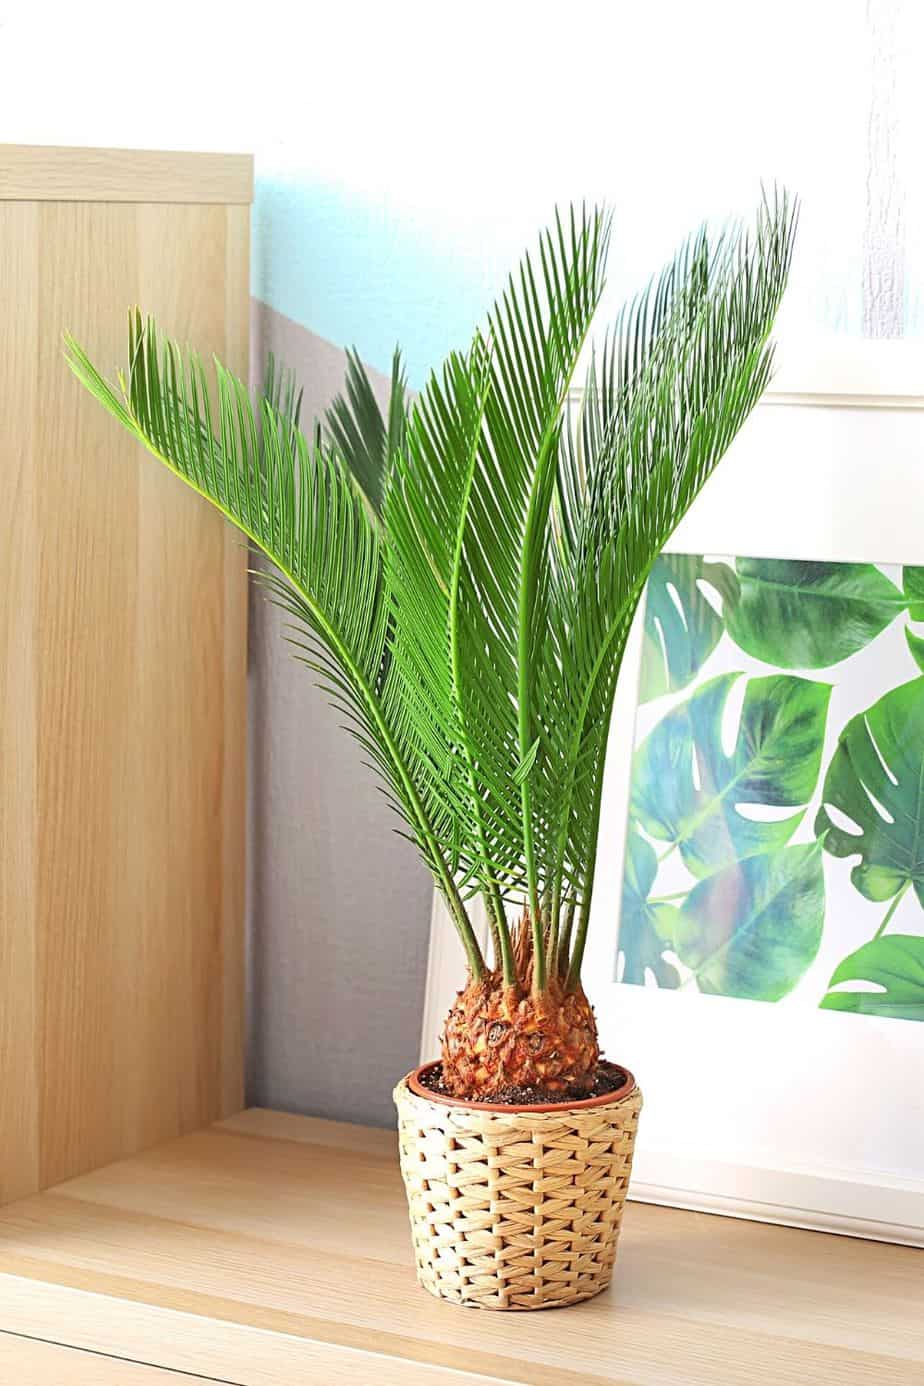 Sago Palm contains cycasin which can cause your cats to experience liver damage or even liver failure when ingested